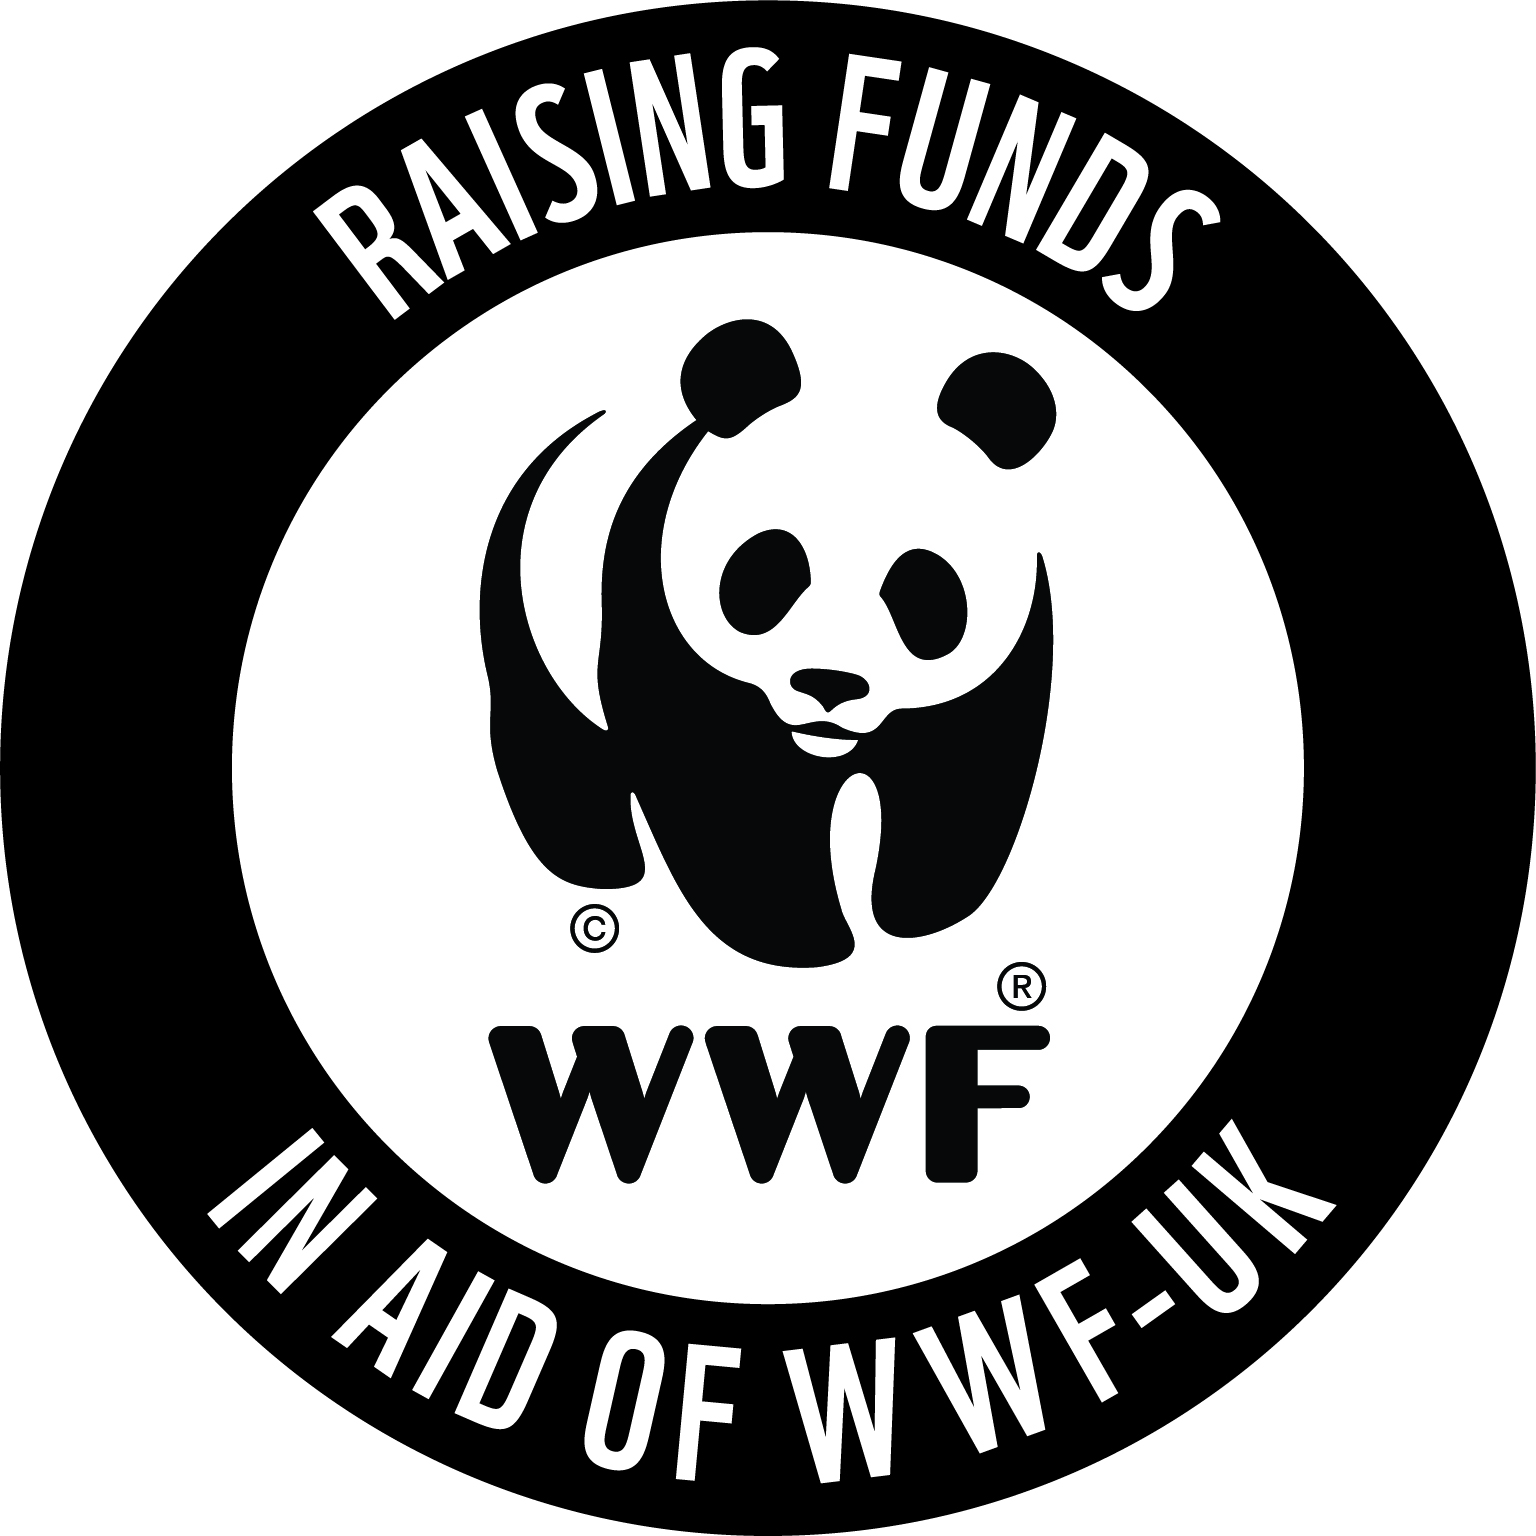 Supporting the wwf